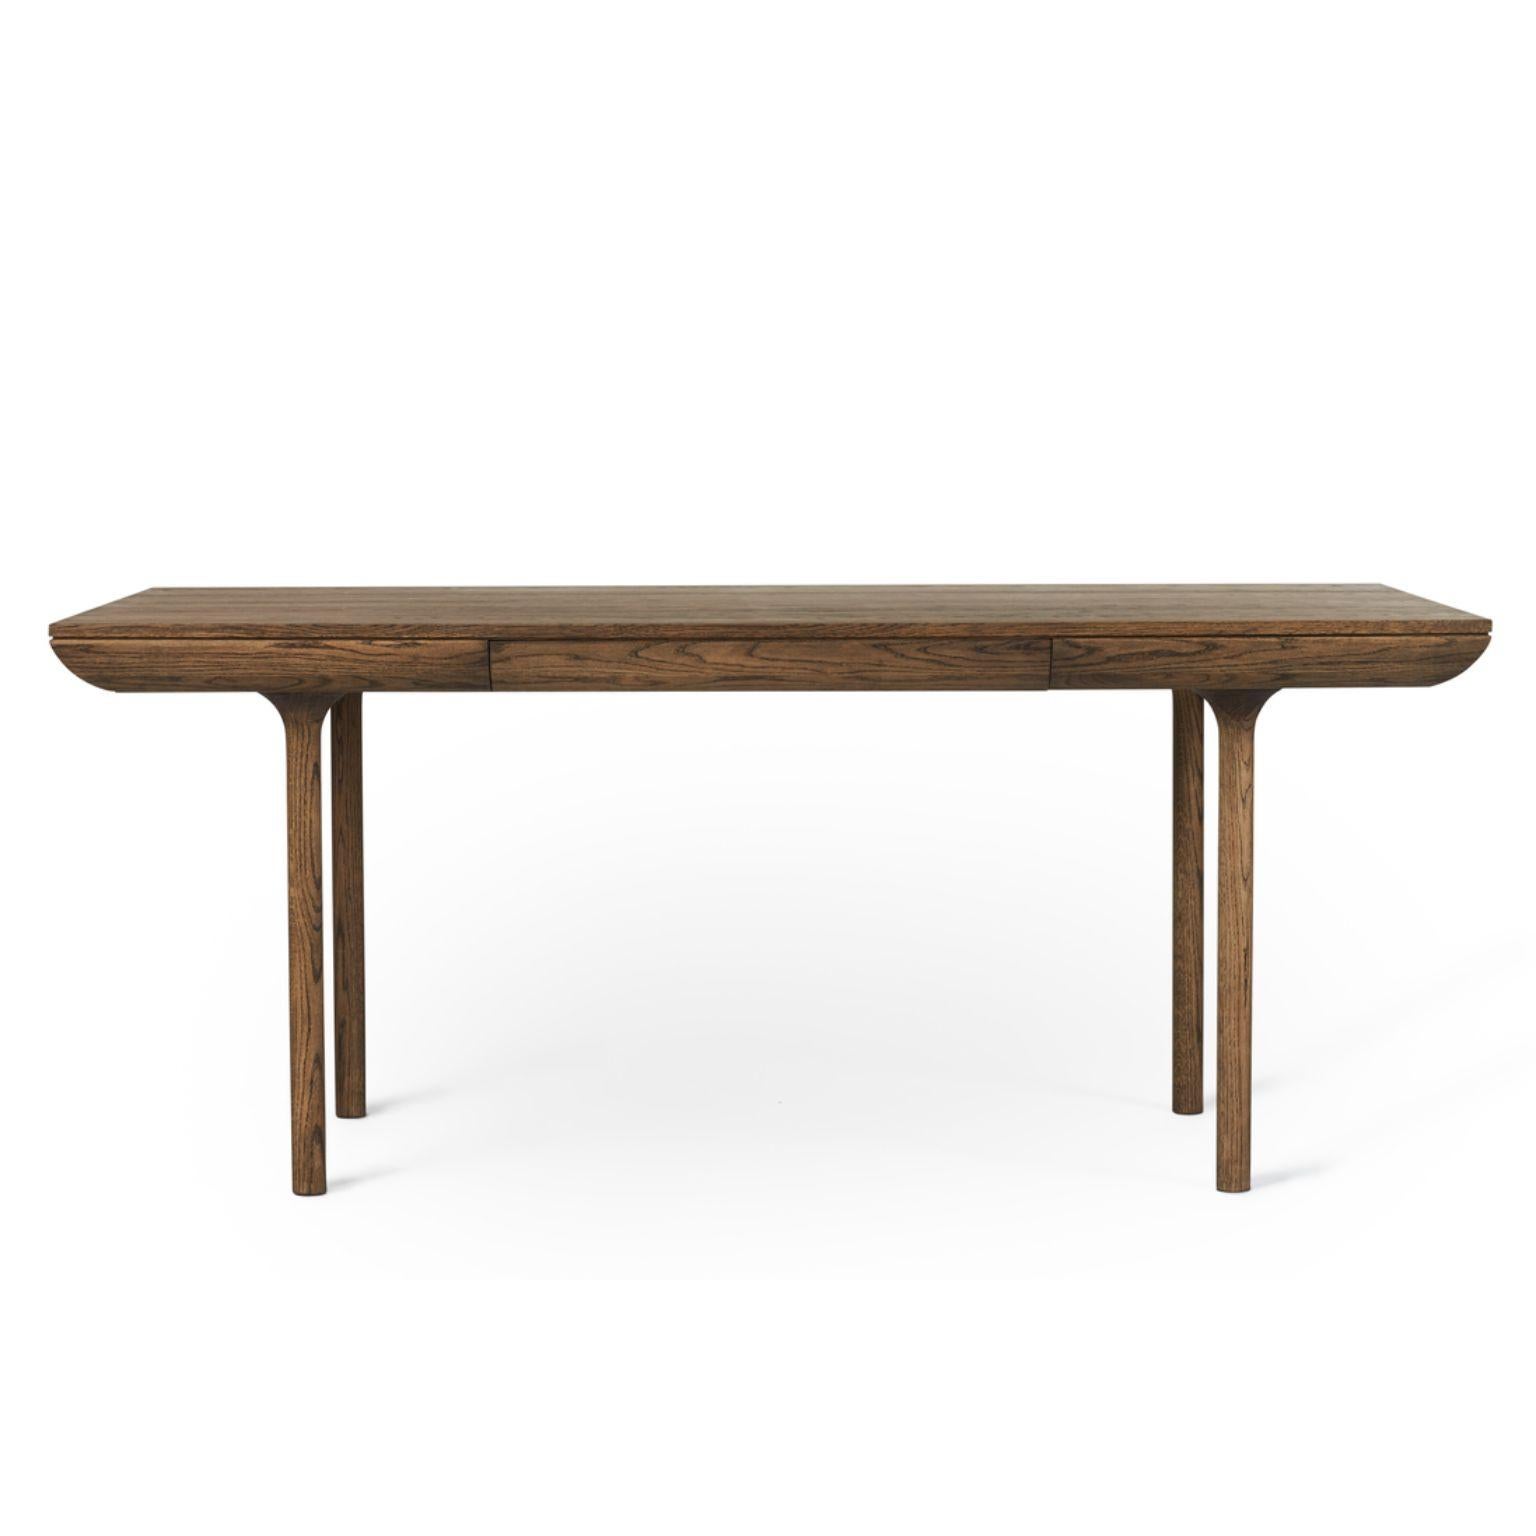 Rúna Smoked Oak Dining Table by Warm Nordic
Dimensions: D180 x W90 x H74 cm
Material: Smoked solid oak
Weight: 47 kg
Also available in different finishes. Please contact us.

Timeless dining table with a poetic idiom and a neat little drawer. With